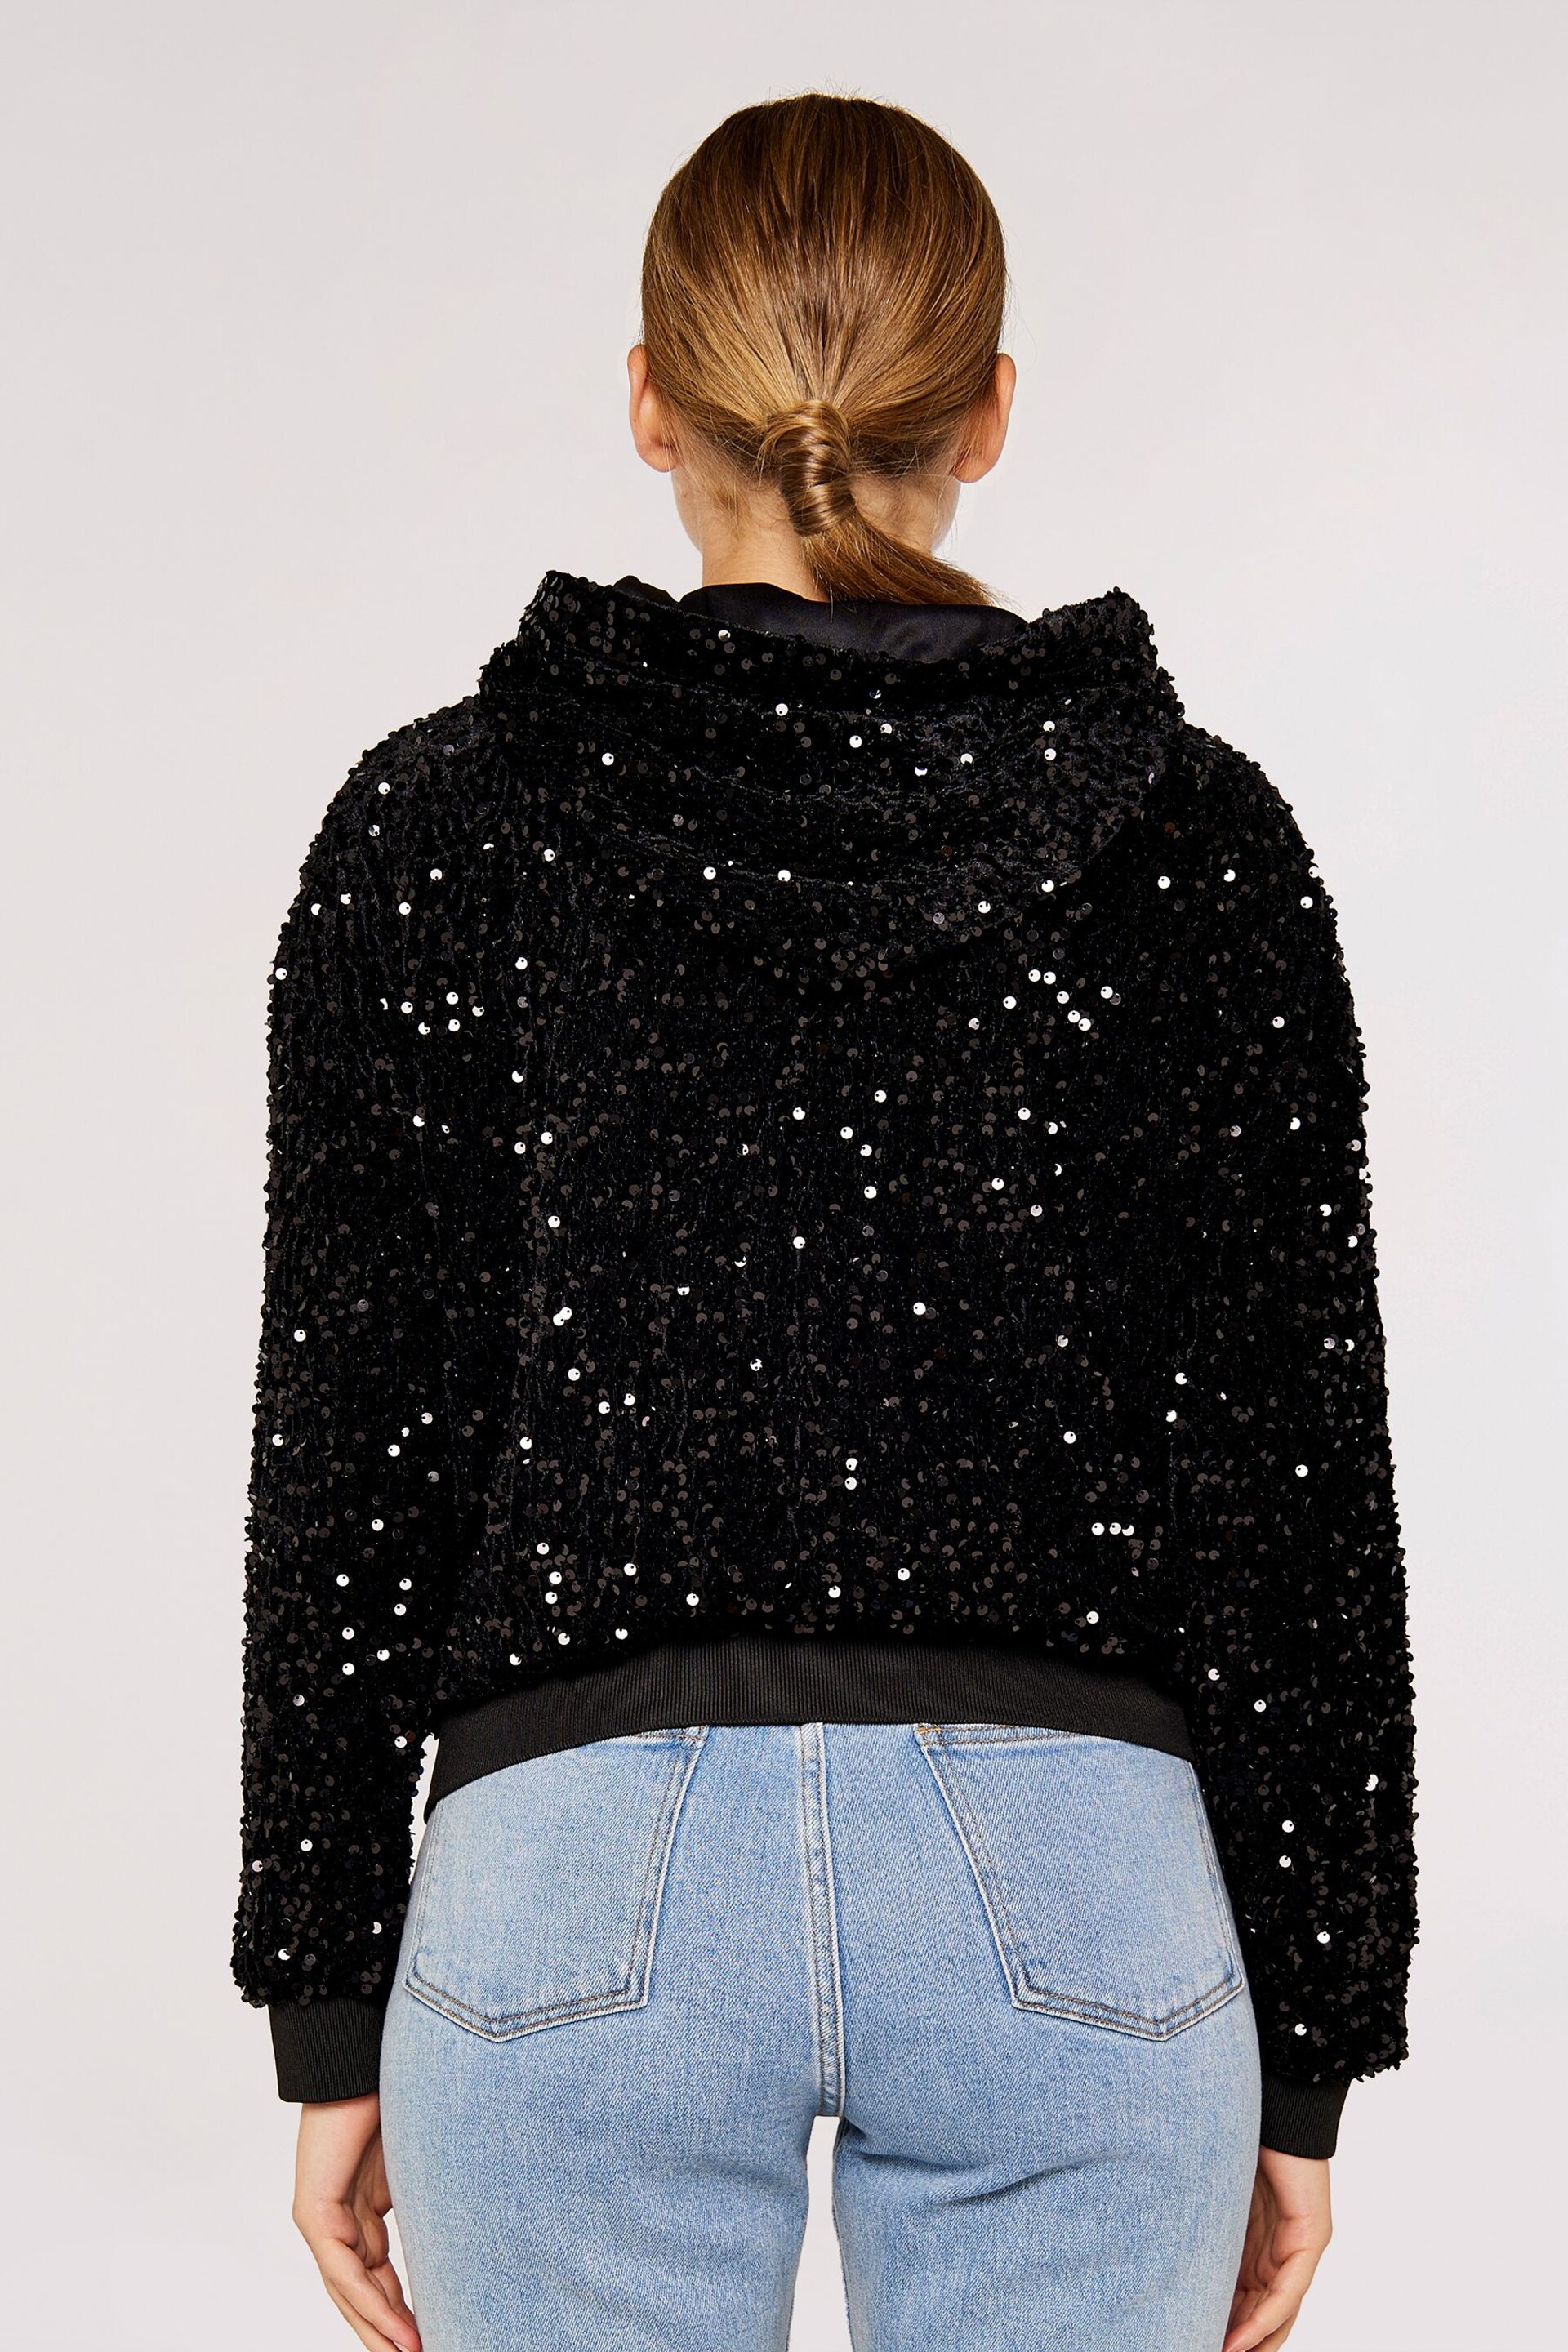 Apricot Black All Over Sequin Bomber Jacket - Image 2 of 5